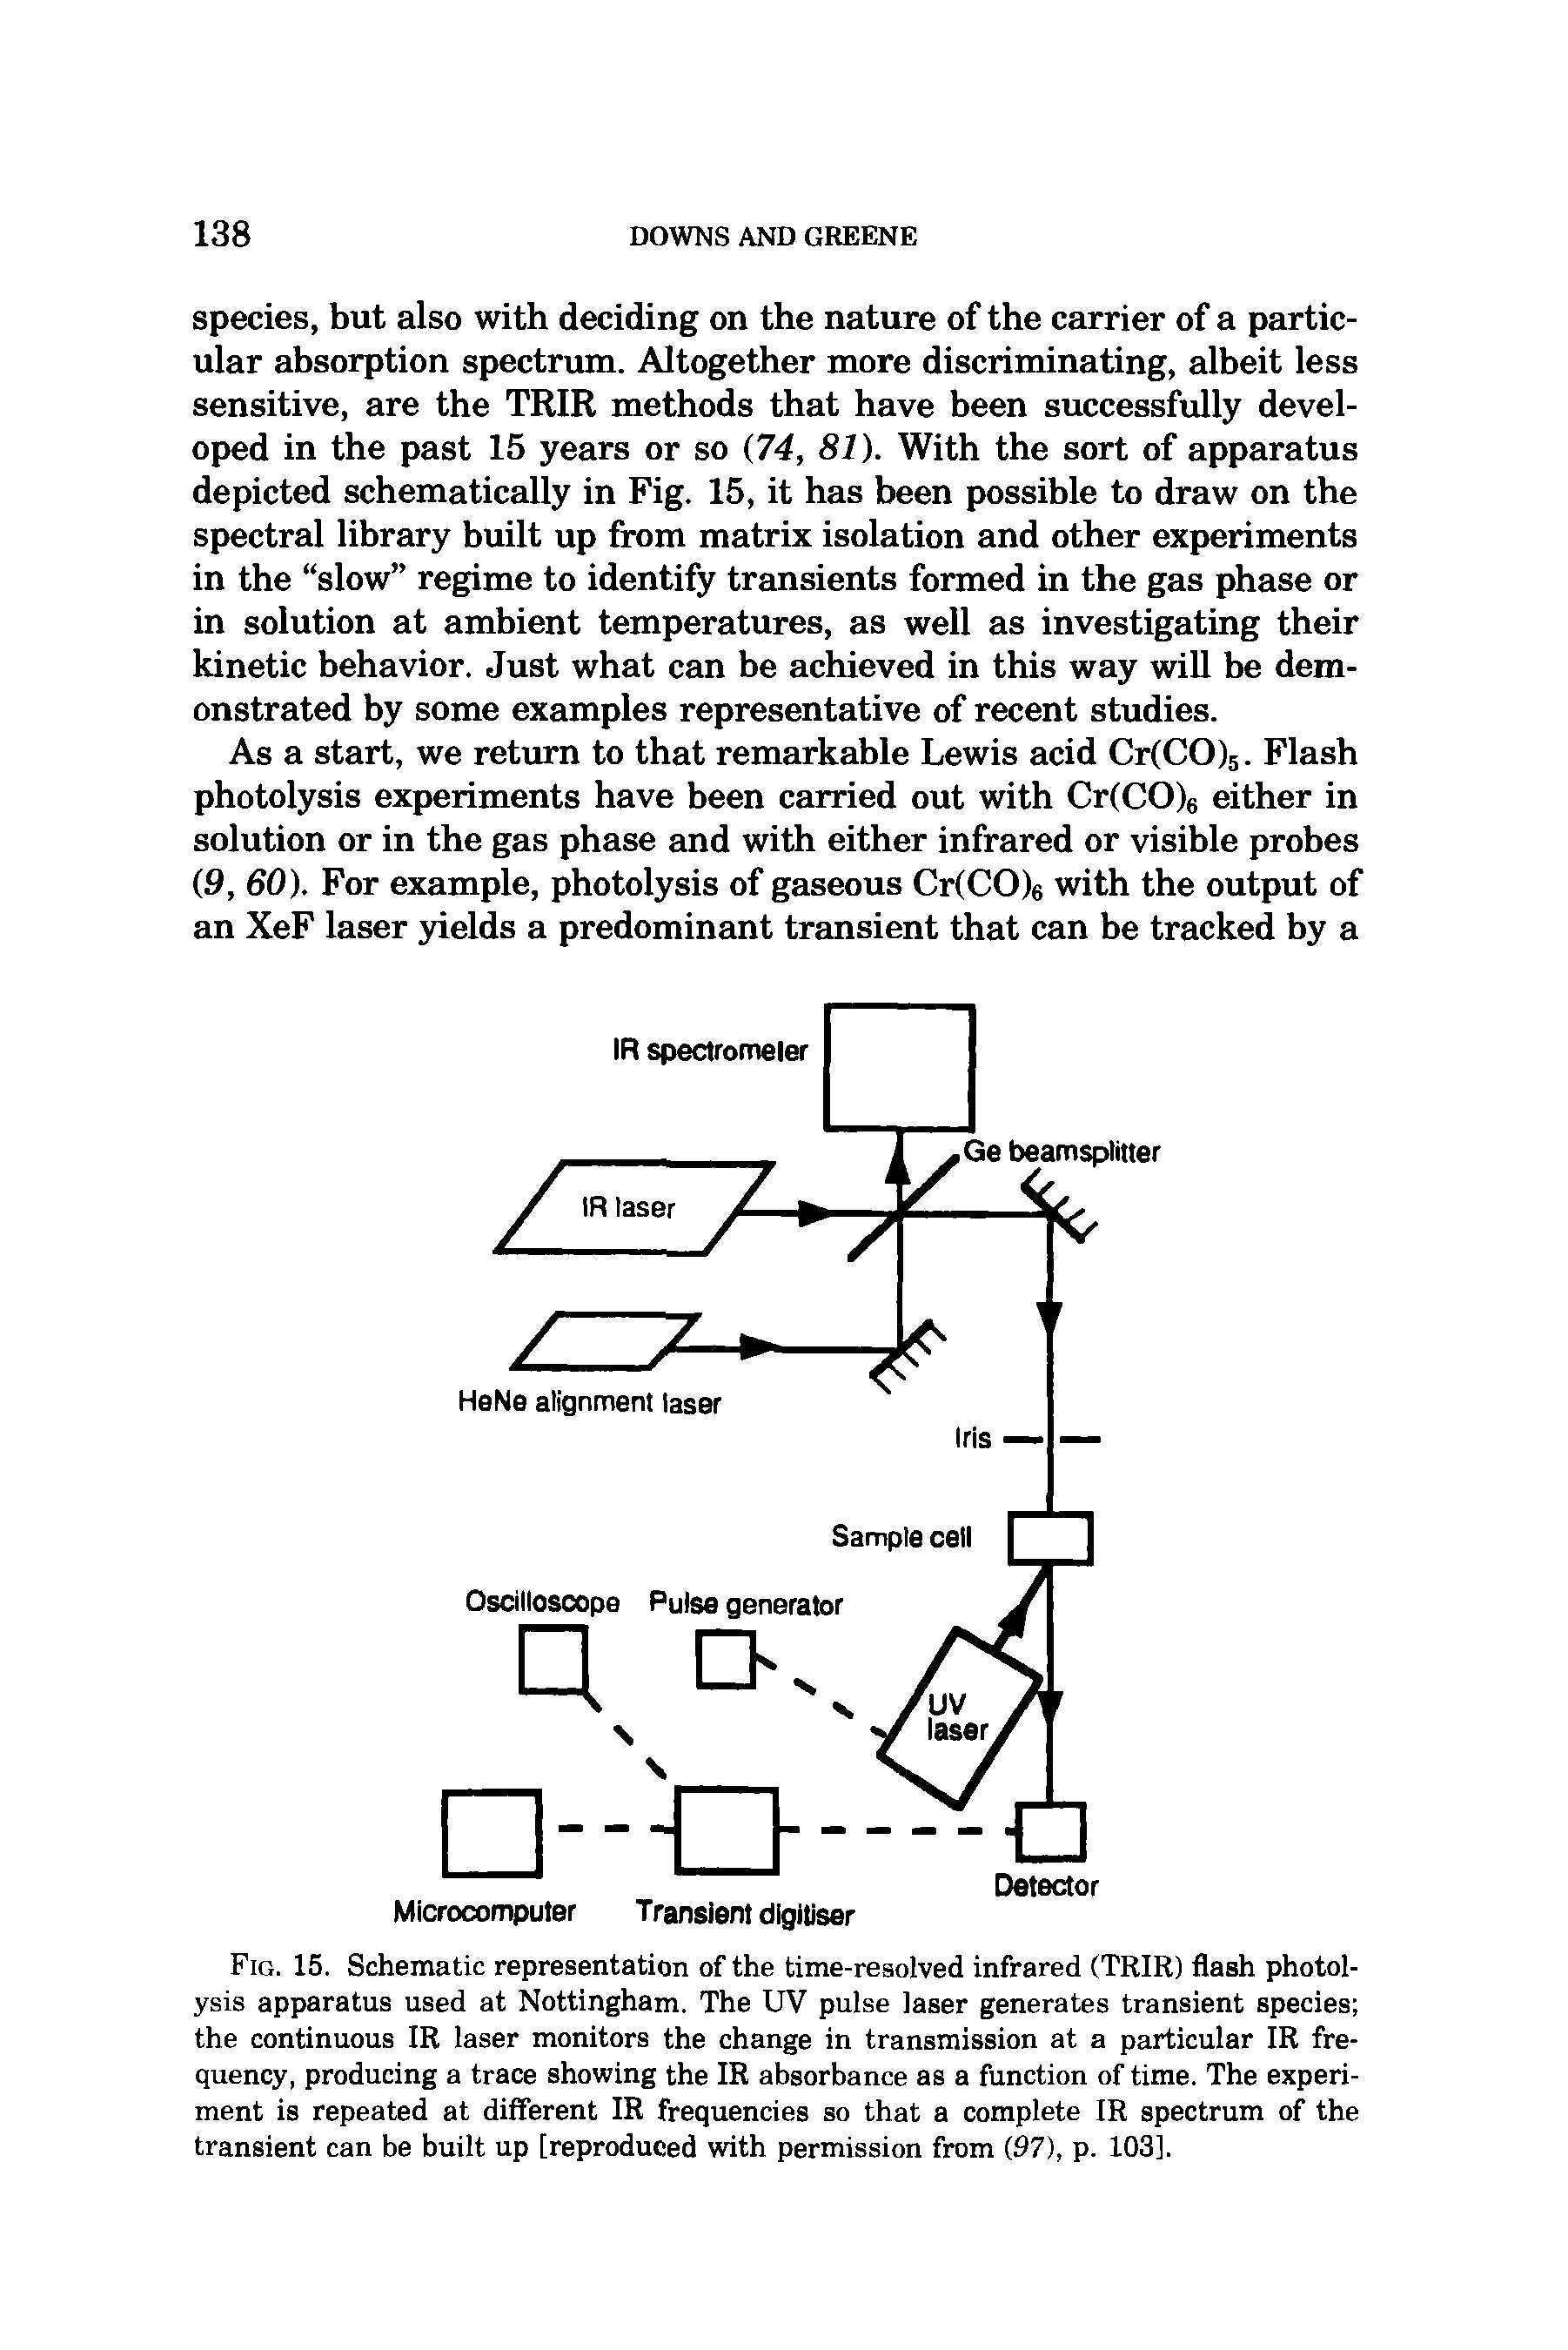 Fig. 15. Schematic representation of the time-resolved infrared (TRIR) flash photolysis apparatus used at Nottingham. The UV pulse laser generates transient species the continuous IR laser monitors the change in transmission at a particular IR frequency, producing a trace showing the IR absorbance as a function of time. The experiment is repeated at different IR frequencies so that a complete IR spectrum of the transient can be built up [reproduced with permission from (97), p. 103],...